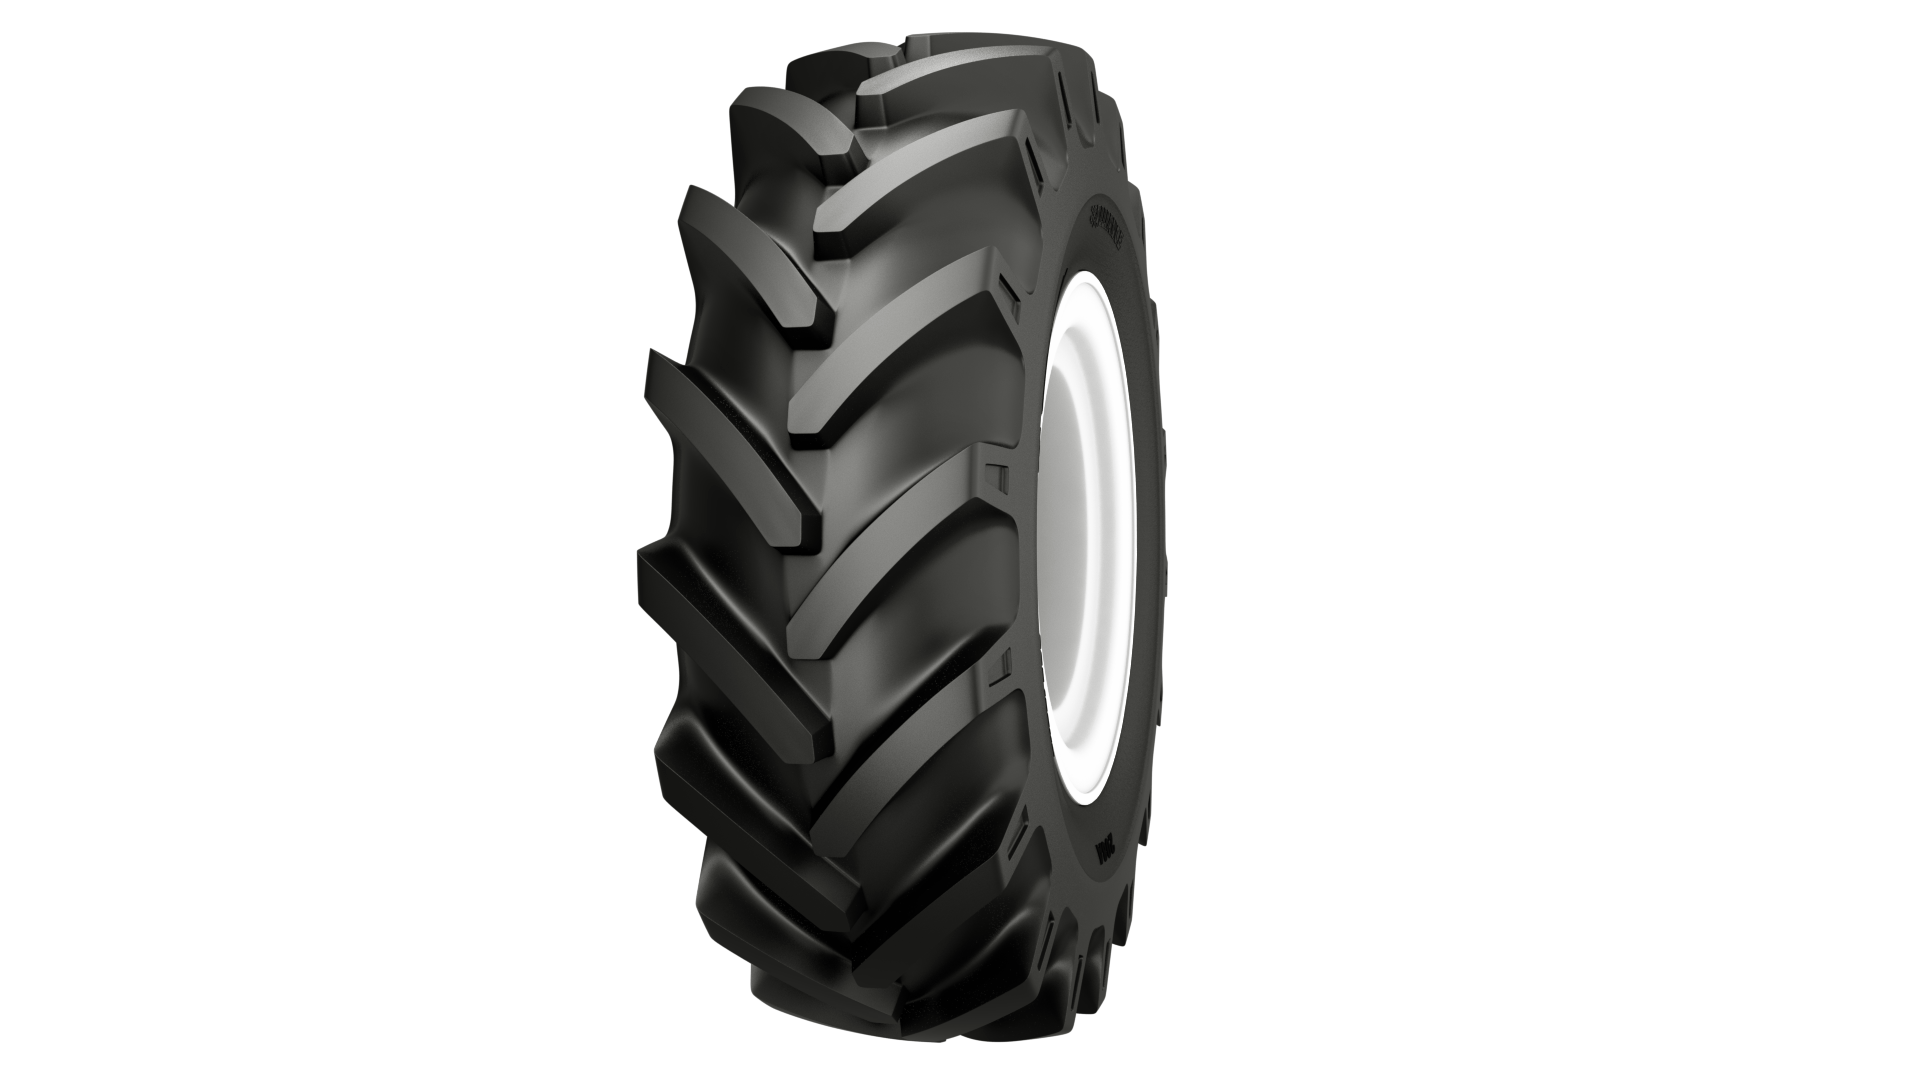 208A ALLIANCE AGRICULTURE Tires